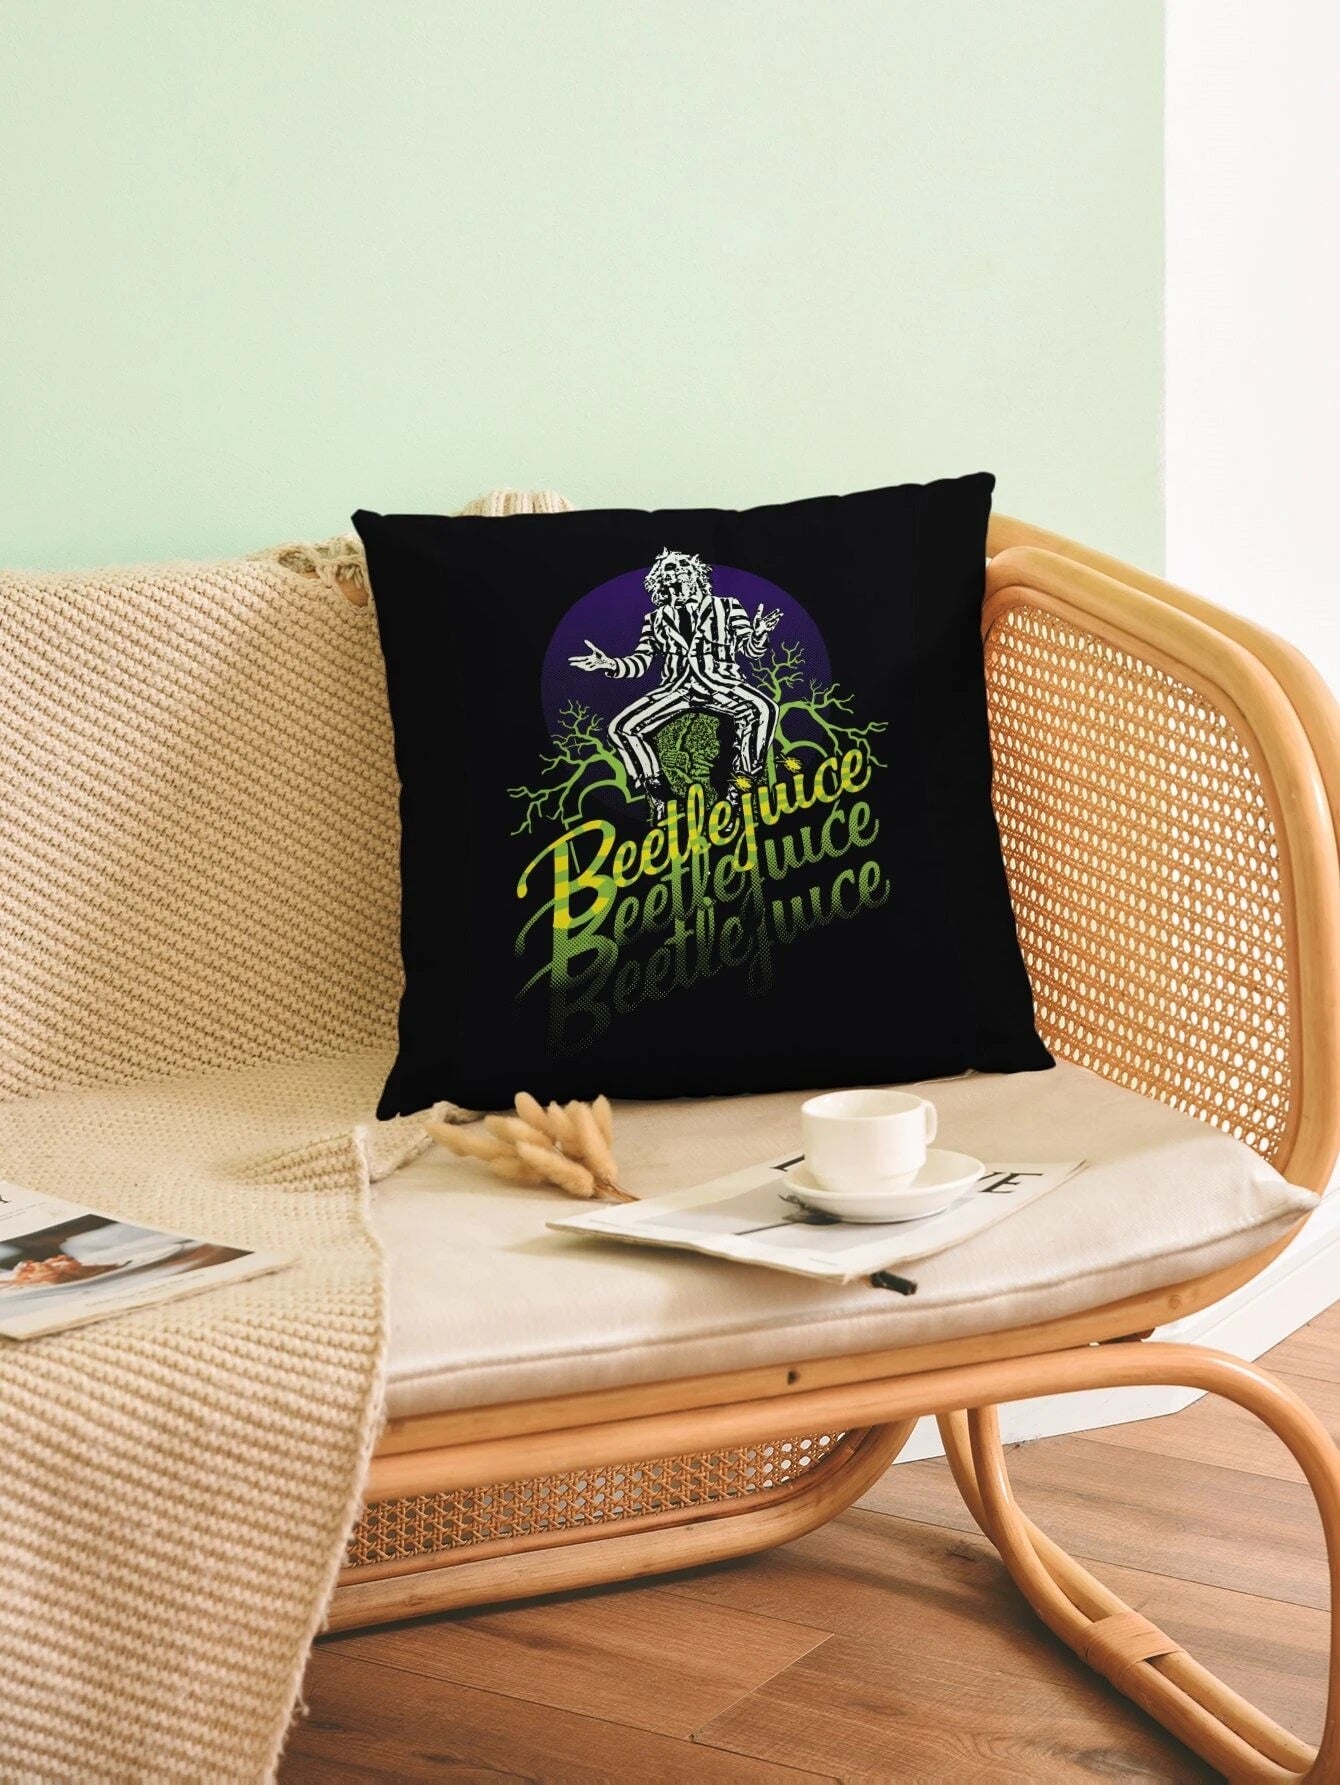 Beetlejuice Scatter Cushion